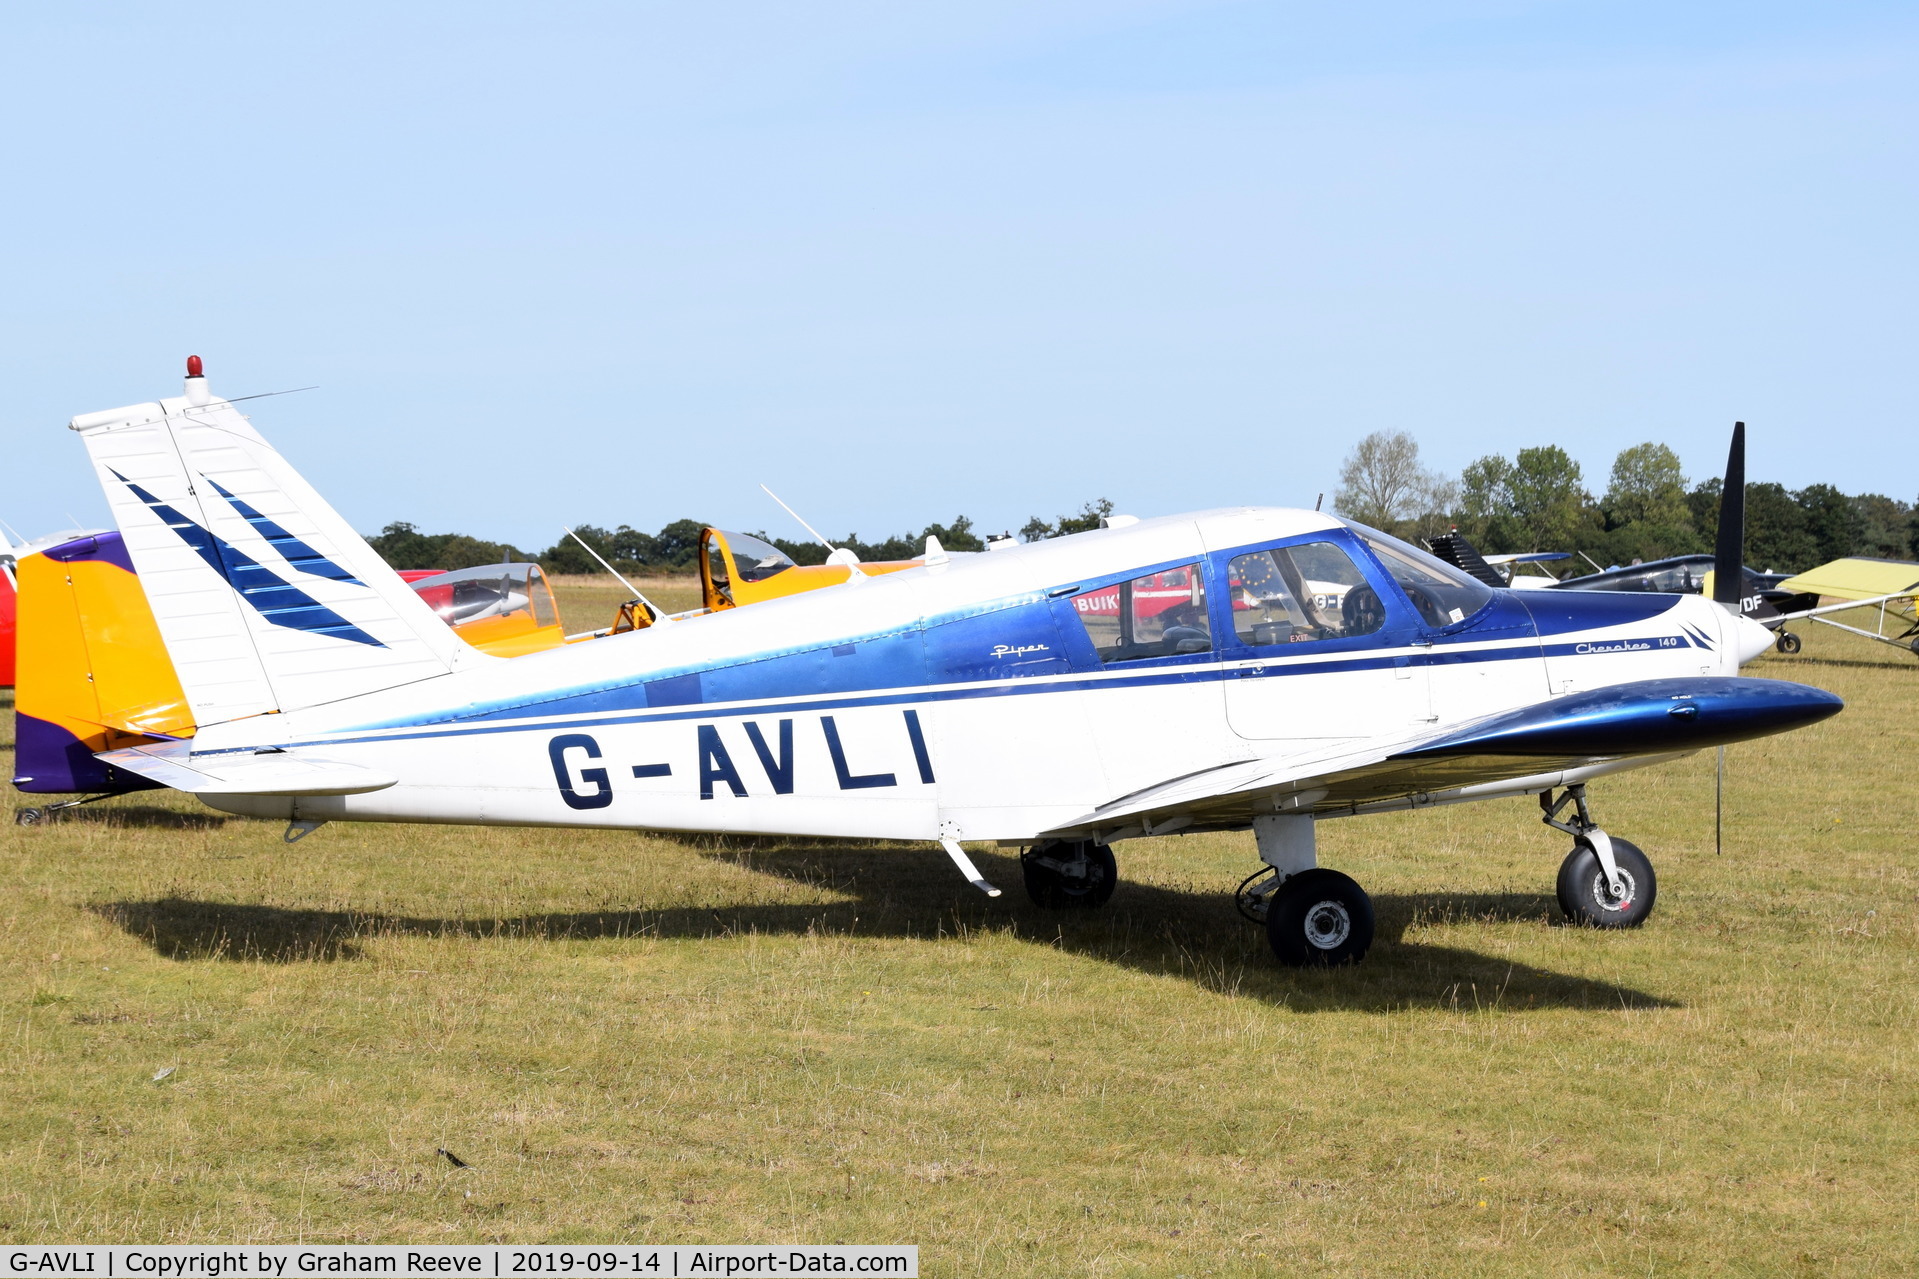 G-AVLI, 1967 Piper PA-28-140 Cherokee C/N 28-23388, Parked at, Bury St Edmunds, Rougham Airfield, UK.